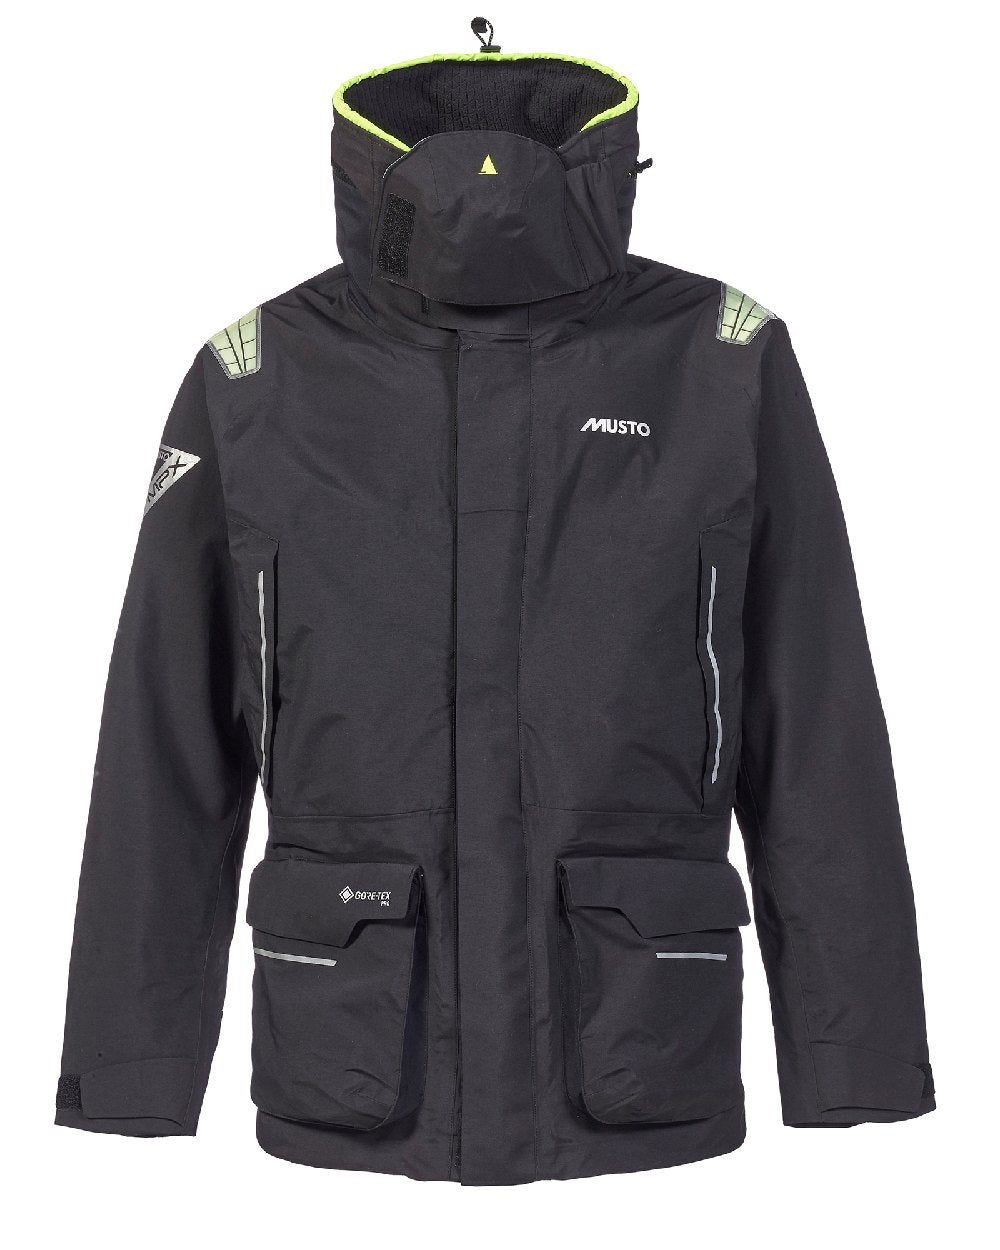 Black coloured Musto Mens Mpx Gtx Pro Offshore Jacket 2.0 on white background 